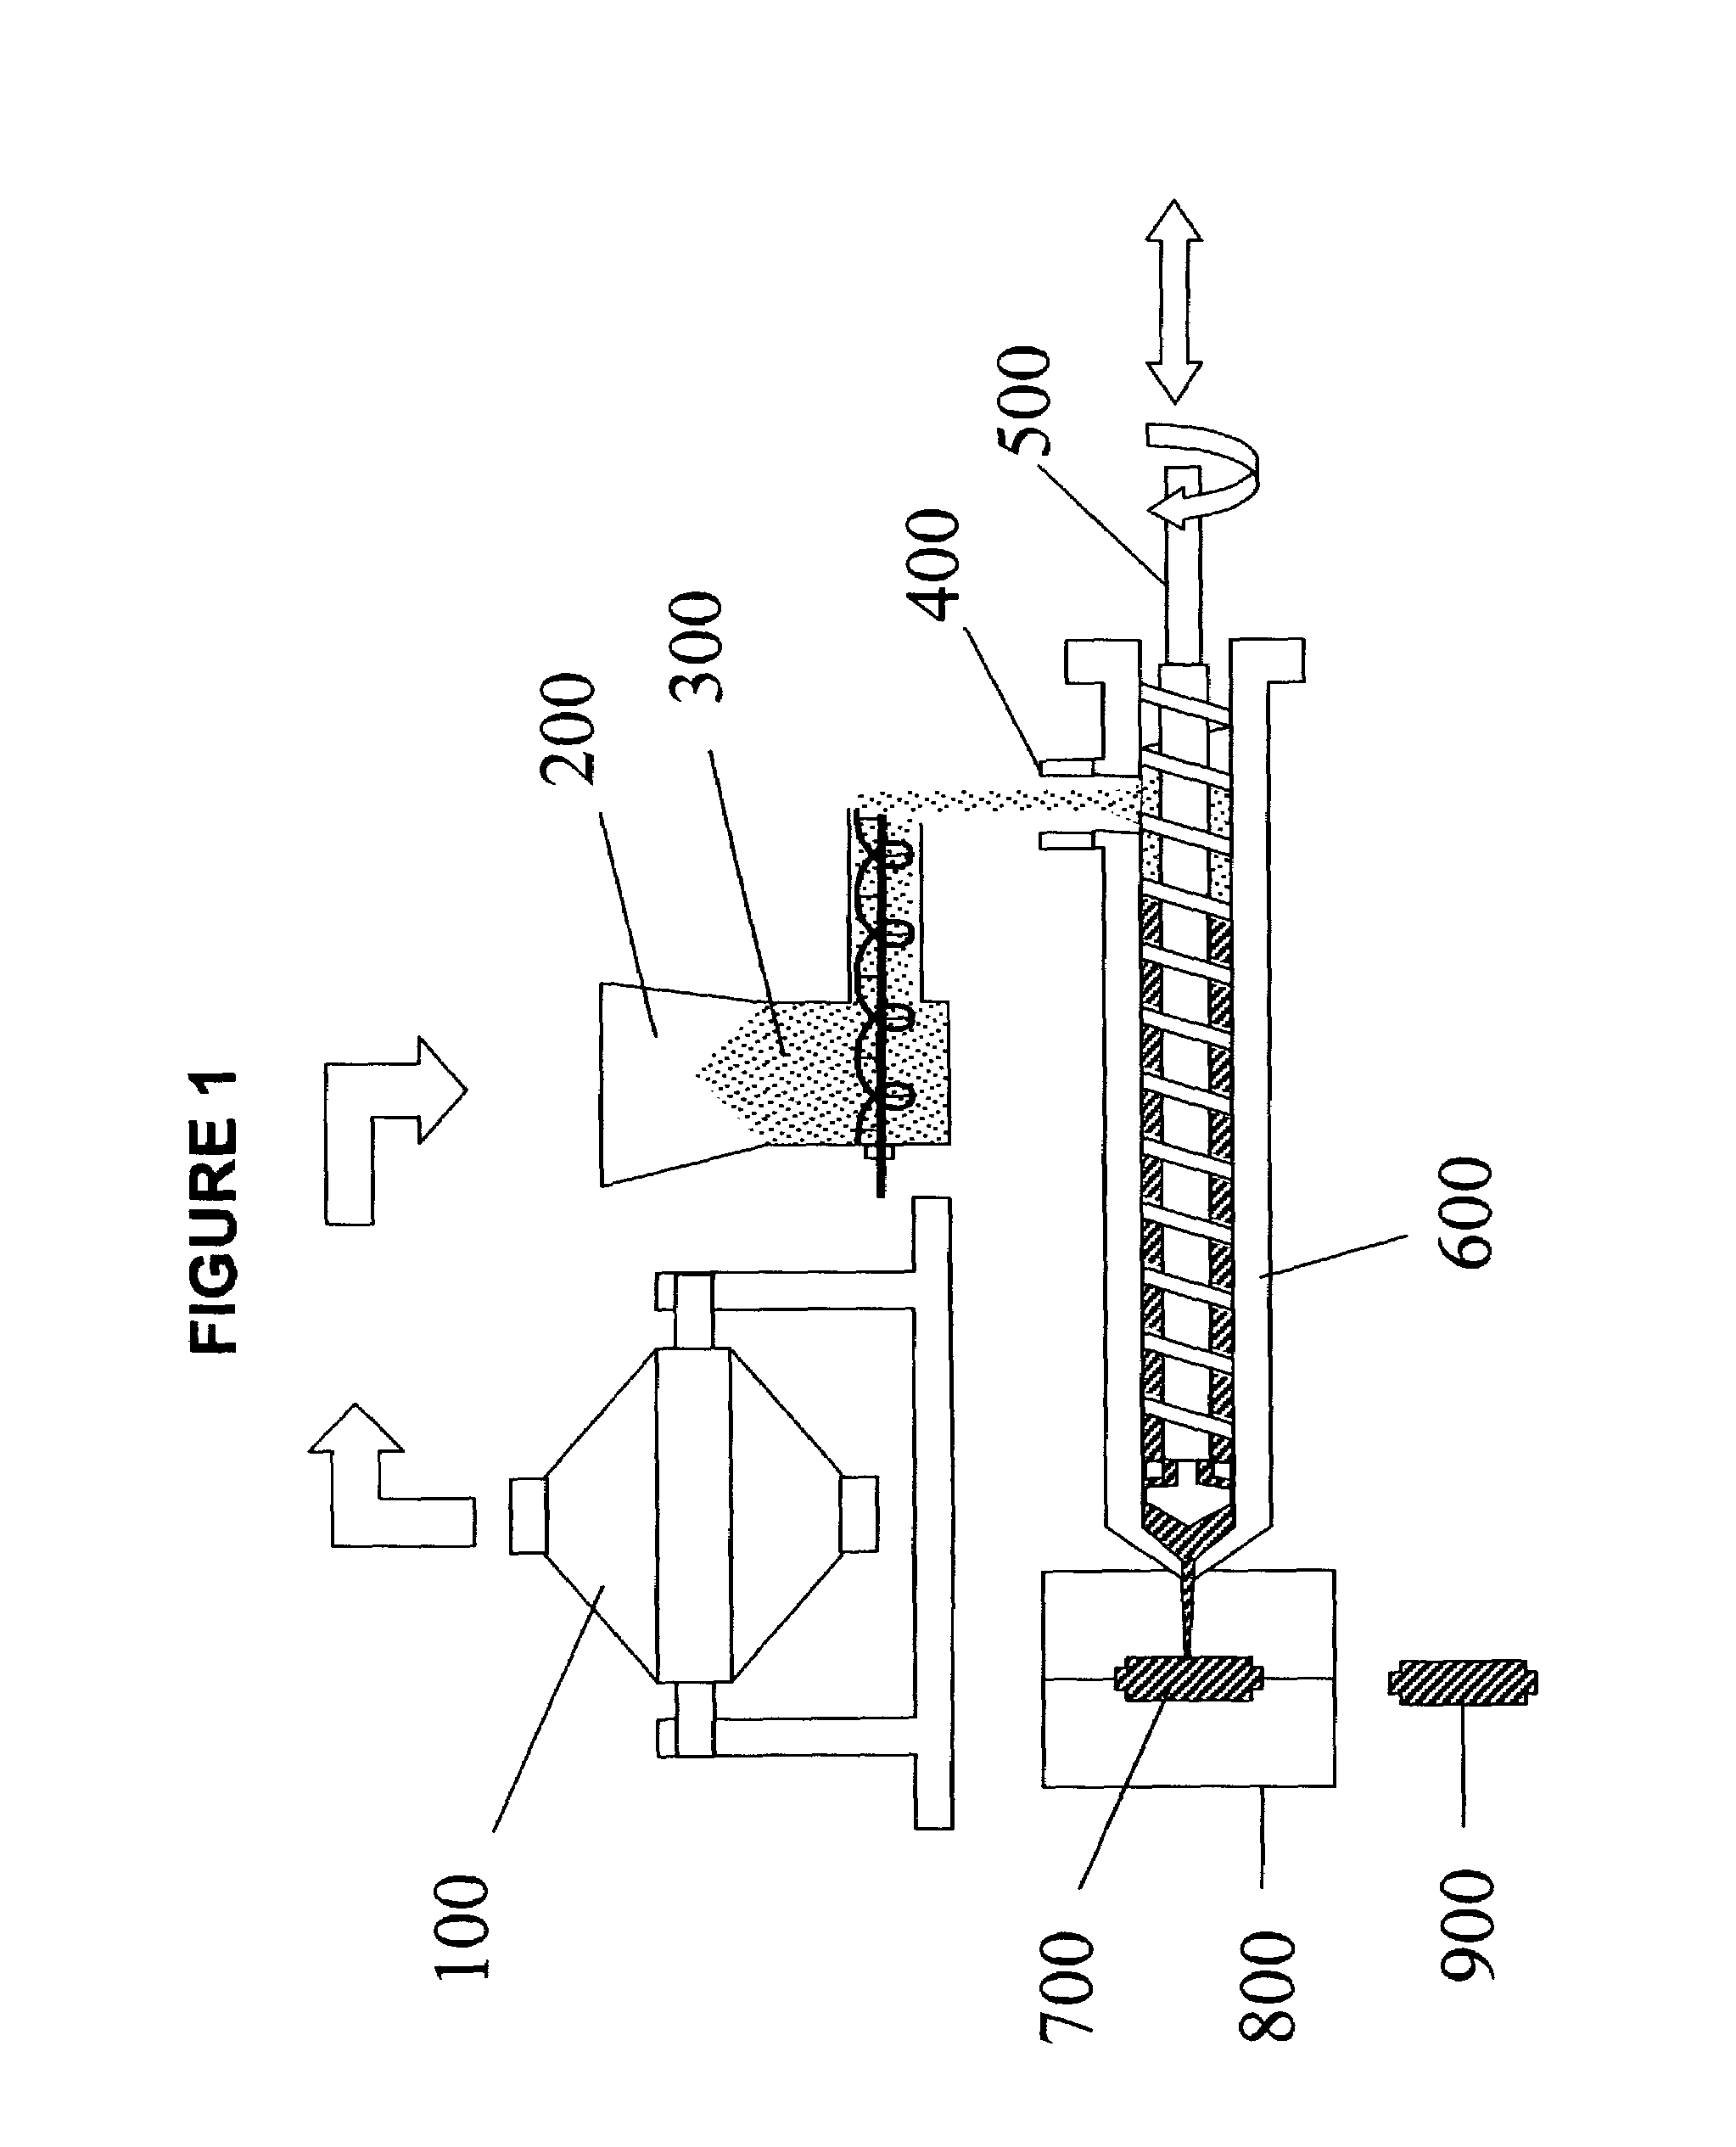 Method of producing shared articles